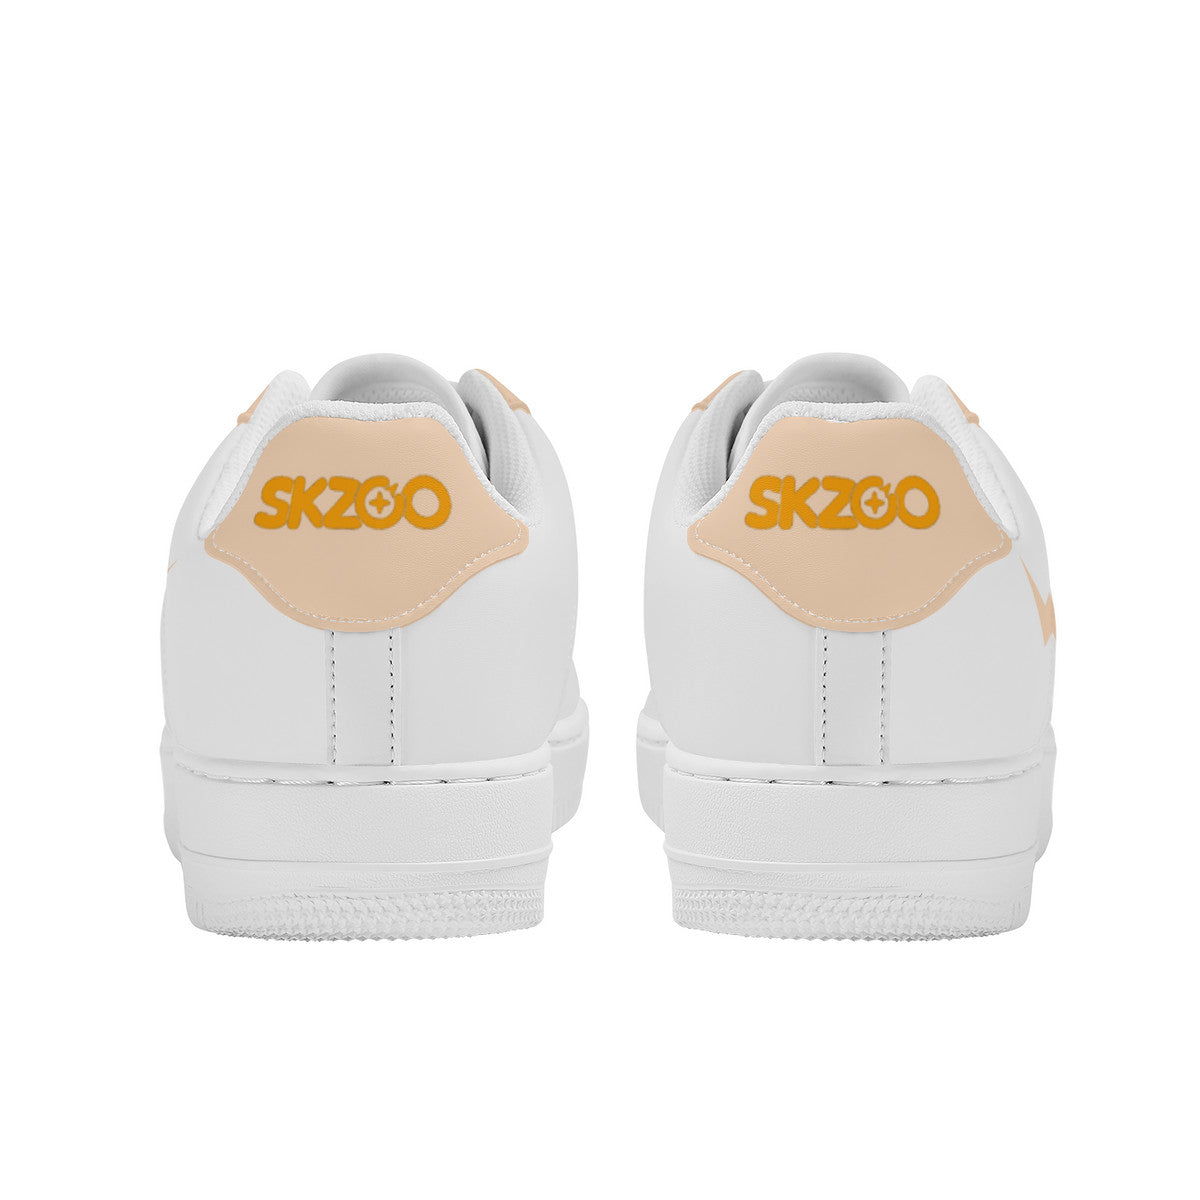 SKZOO PuppyM Low Top Sneakers: Stray Kids Seungmin Shoes